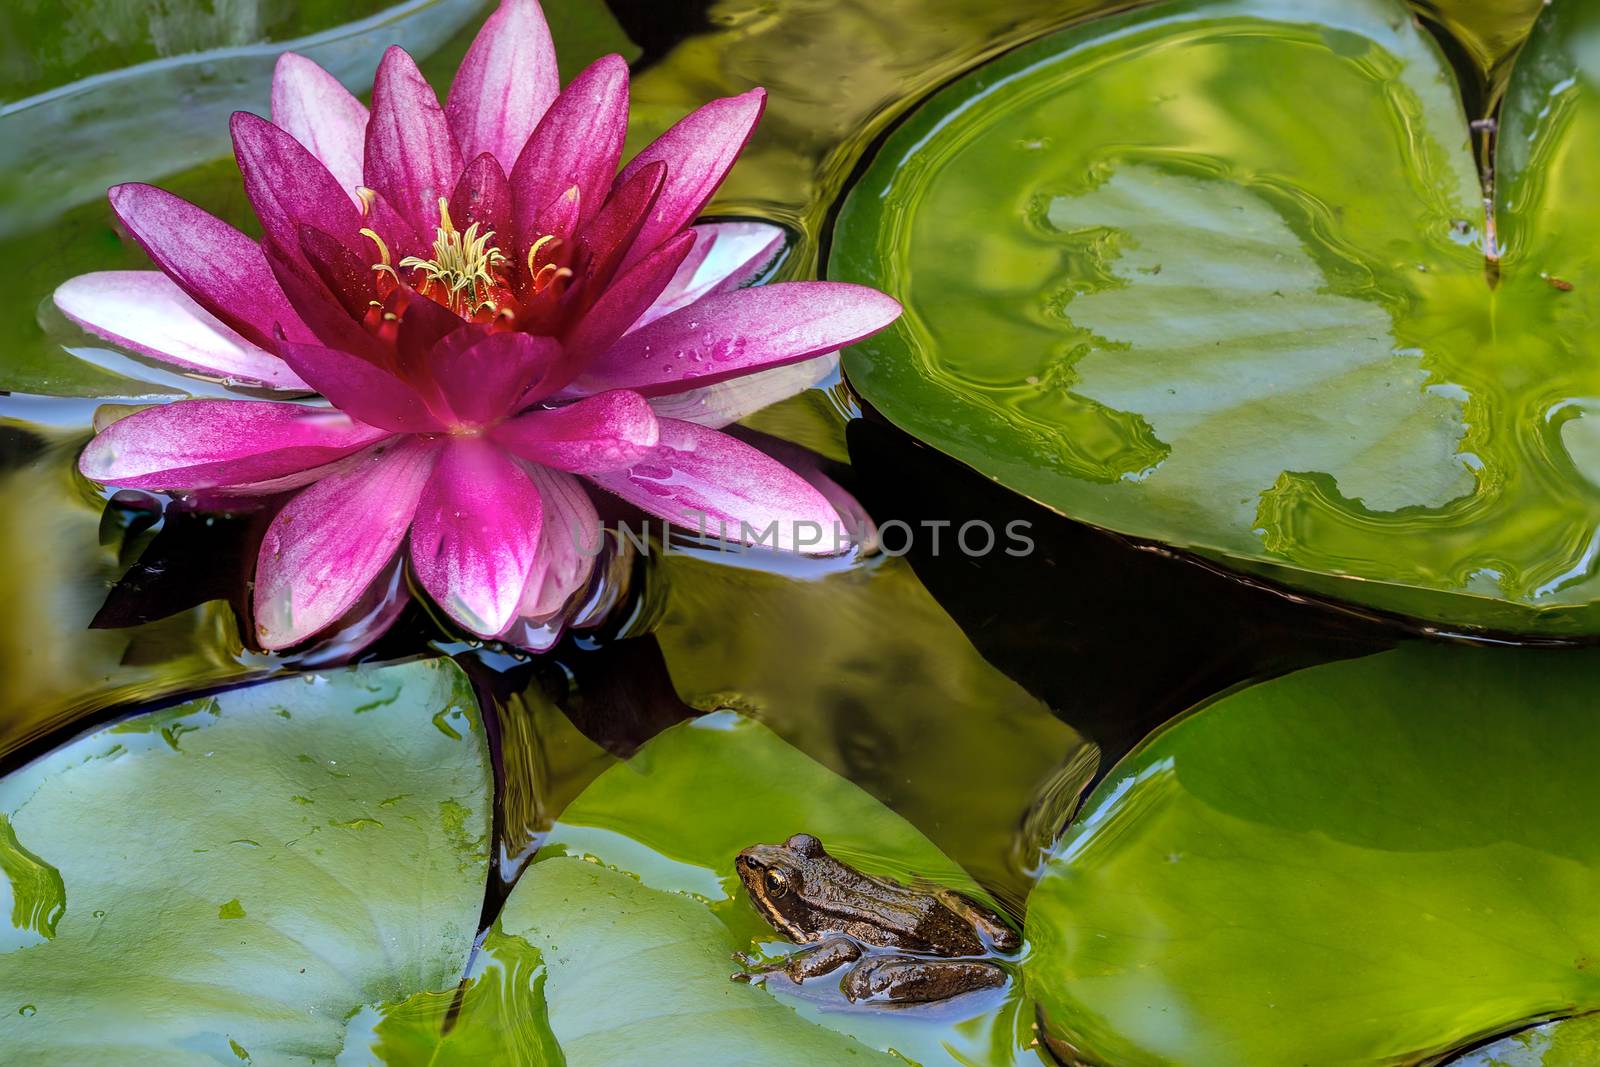 Pacific Tree Frog Sitting on Water Lily Pad by Davidgn